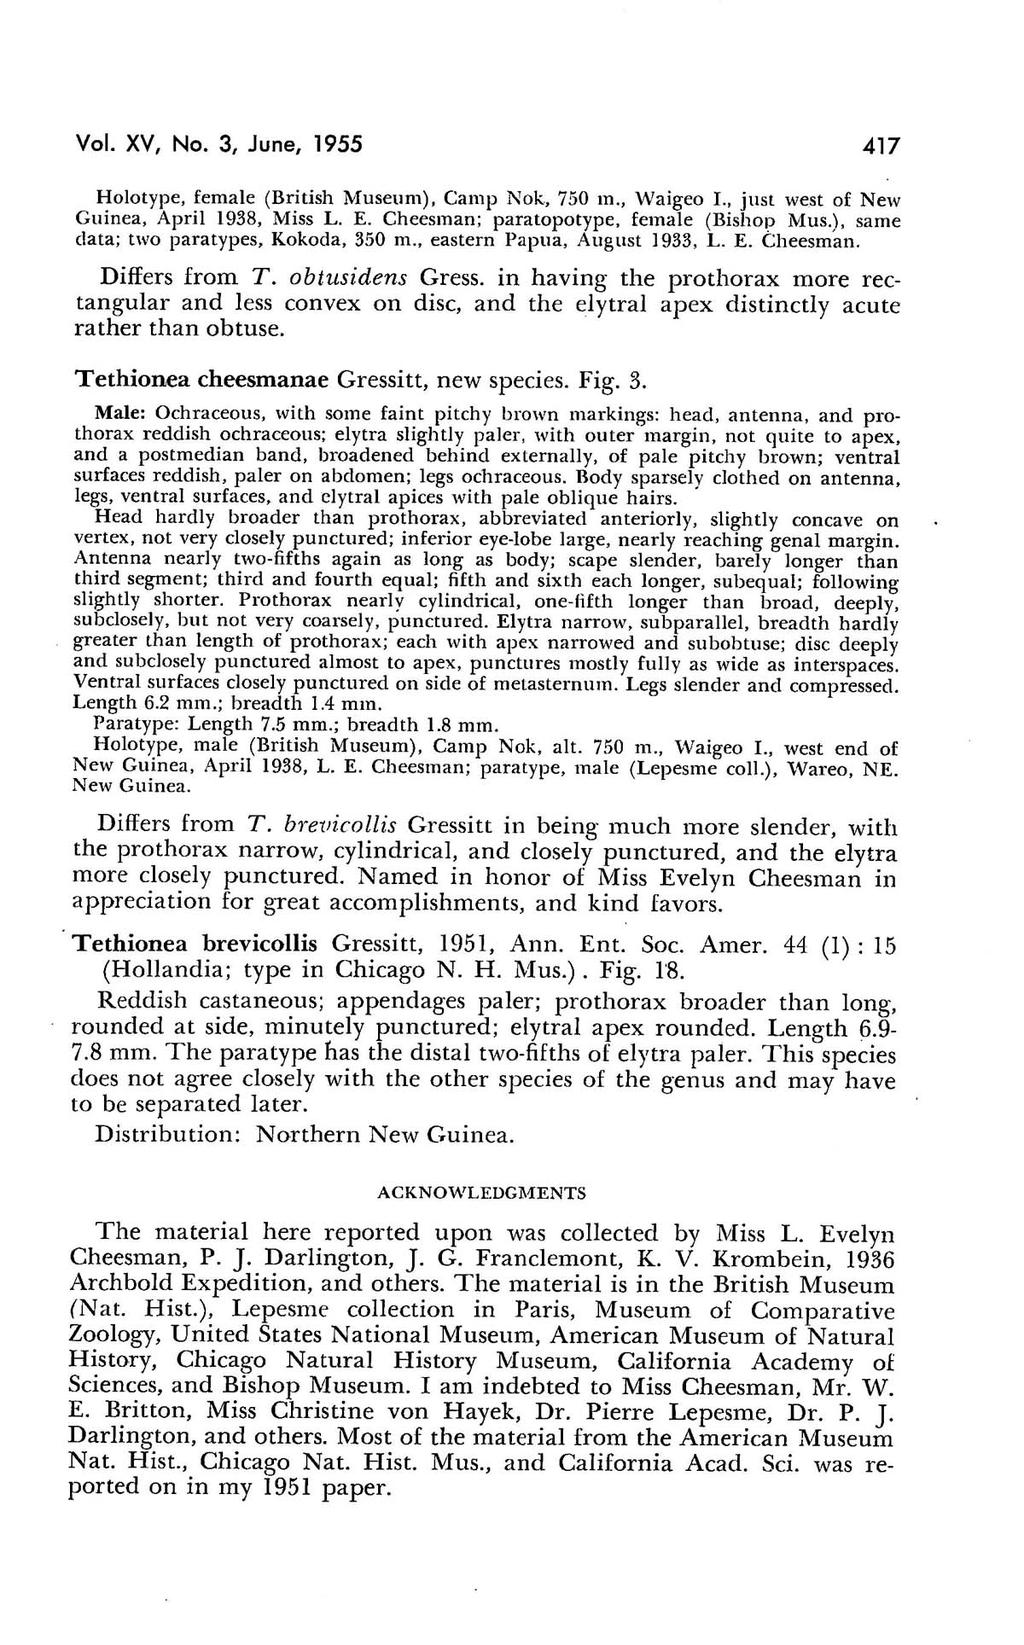 Vol. XV, No.3, June, 1955 417 HoJotype, female (British Museum). Camp Nok, 750 m., \'\'aigeo J., just west of New Guinea. April 1938. Miss L. E. Cheesman; paralopotype, female (Bishop Mus.). same data; two paralypes, Kokoda.